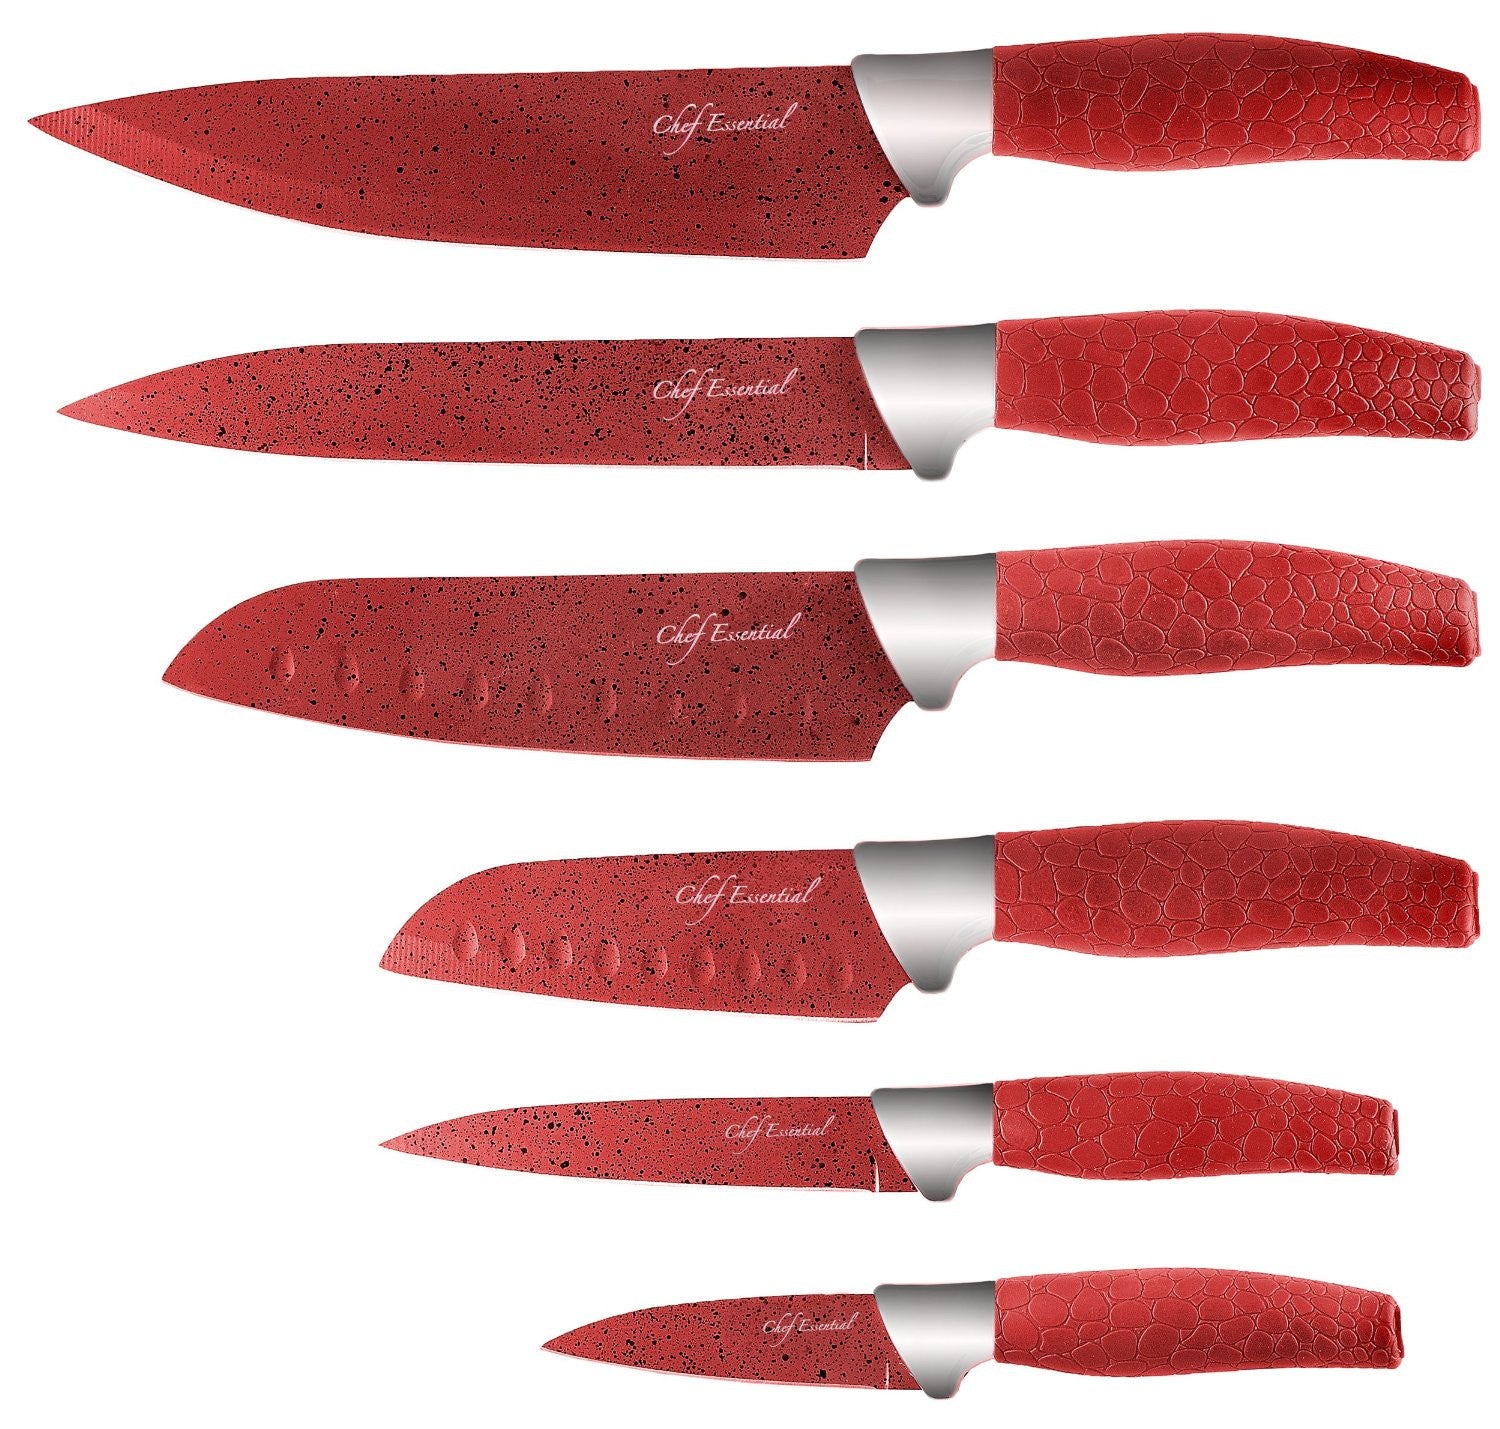 https://chefessentialproducts.com/cdn/shop/products/Red_knives.jpg?v=1459262261